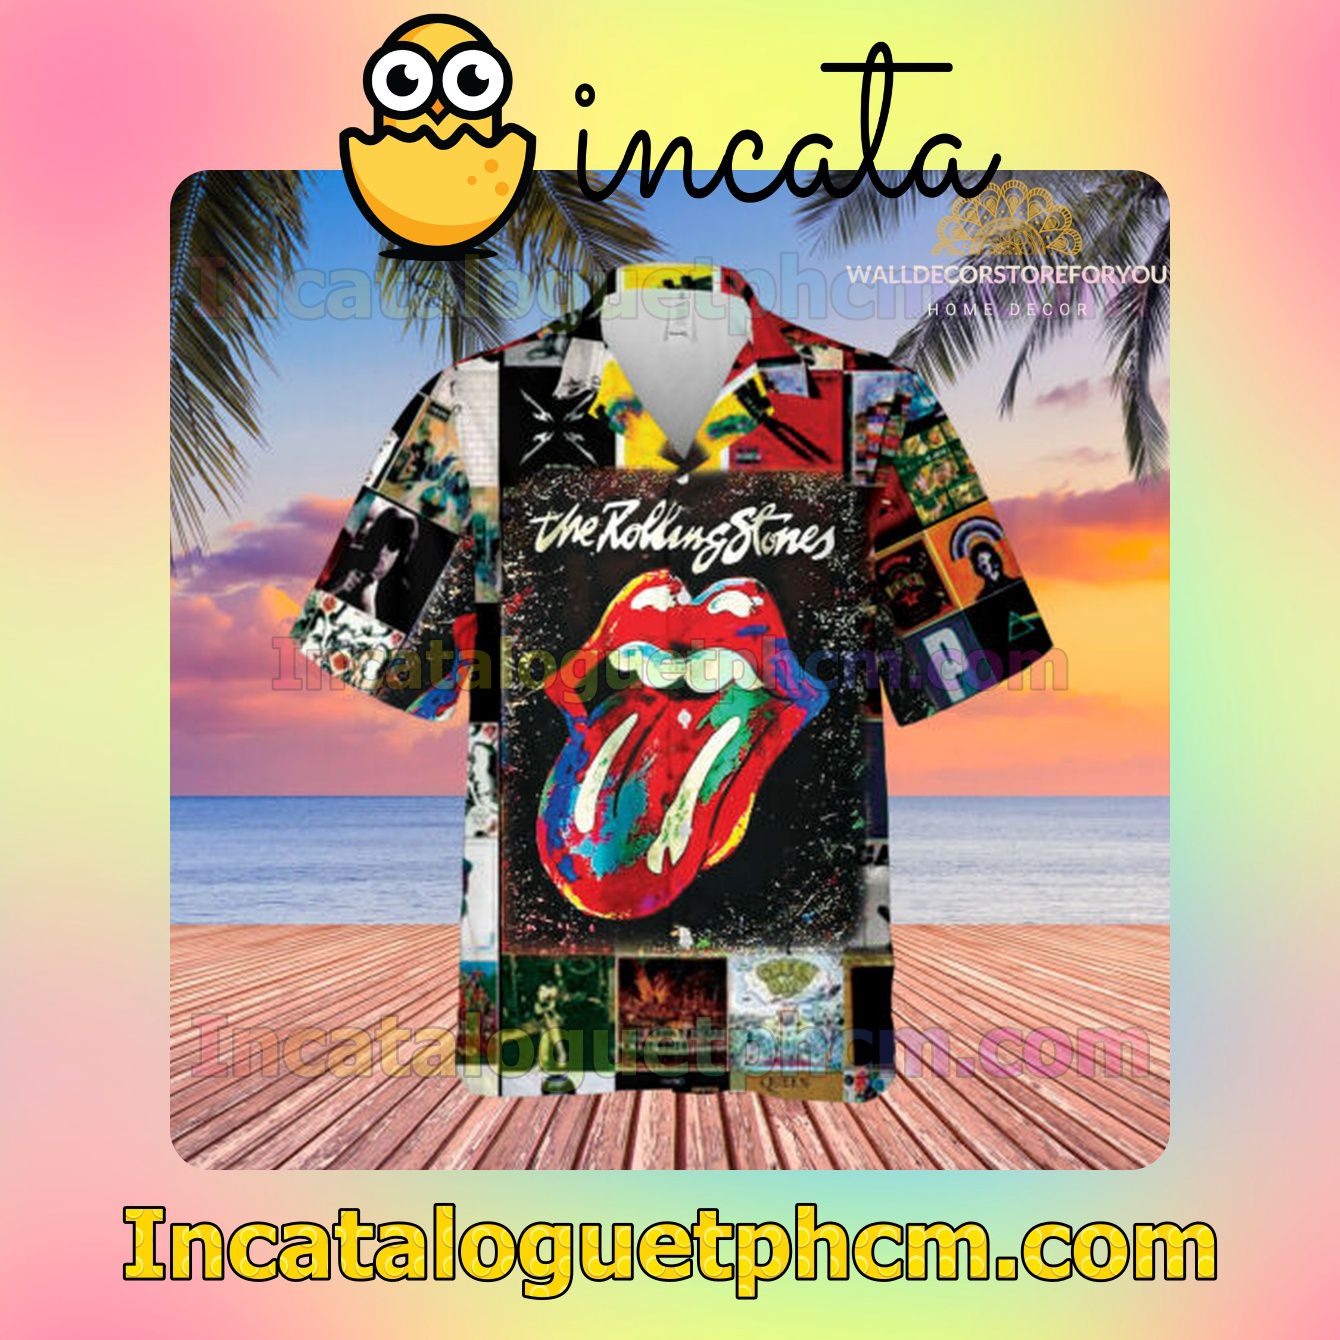 The Rolling Stones A Classic Beach Shirt